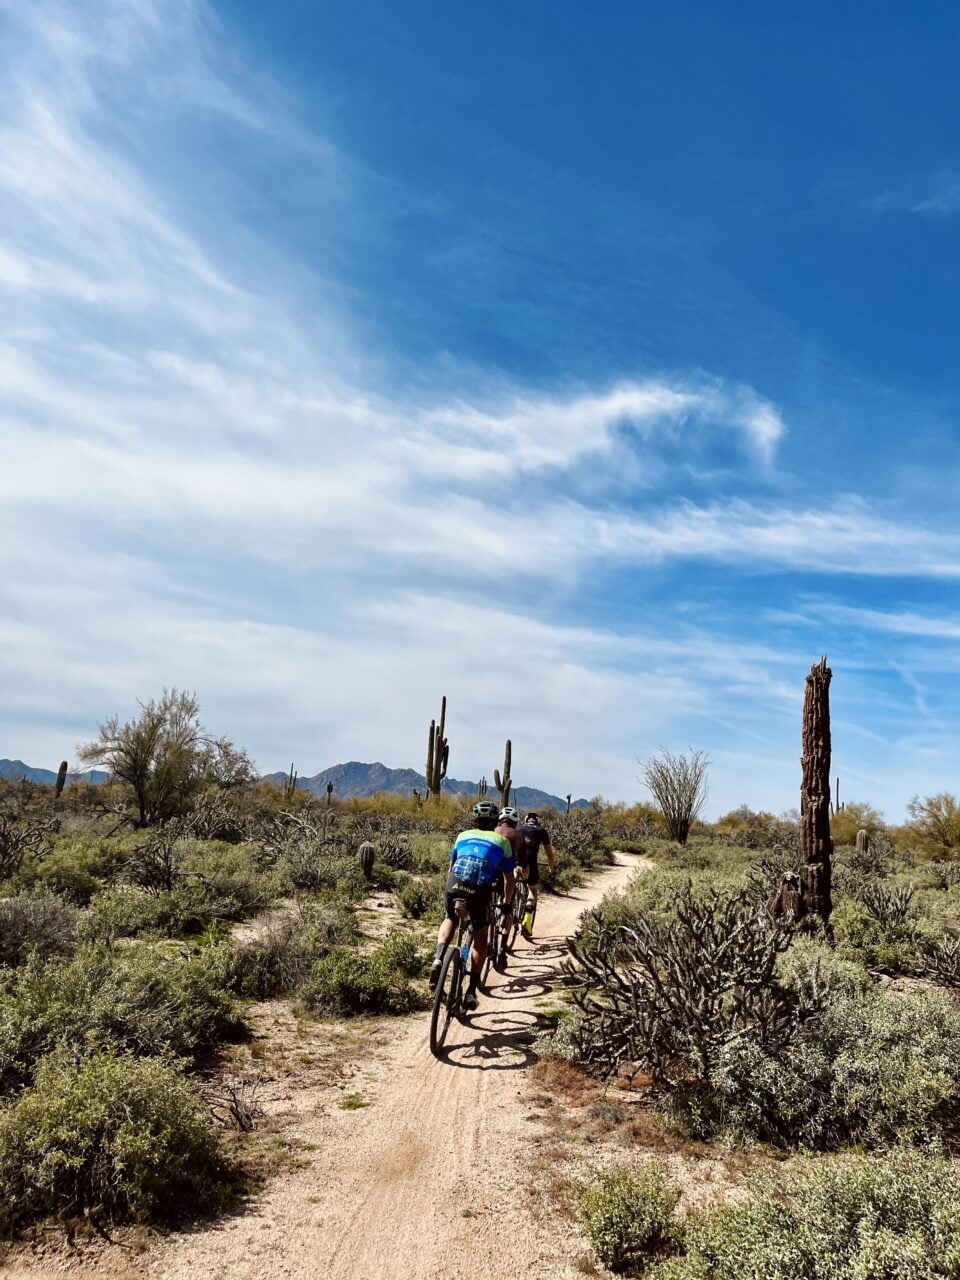 Cycling on a trail among cactuses